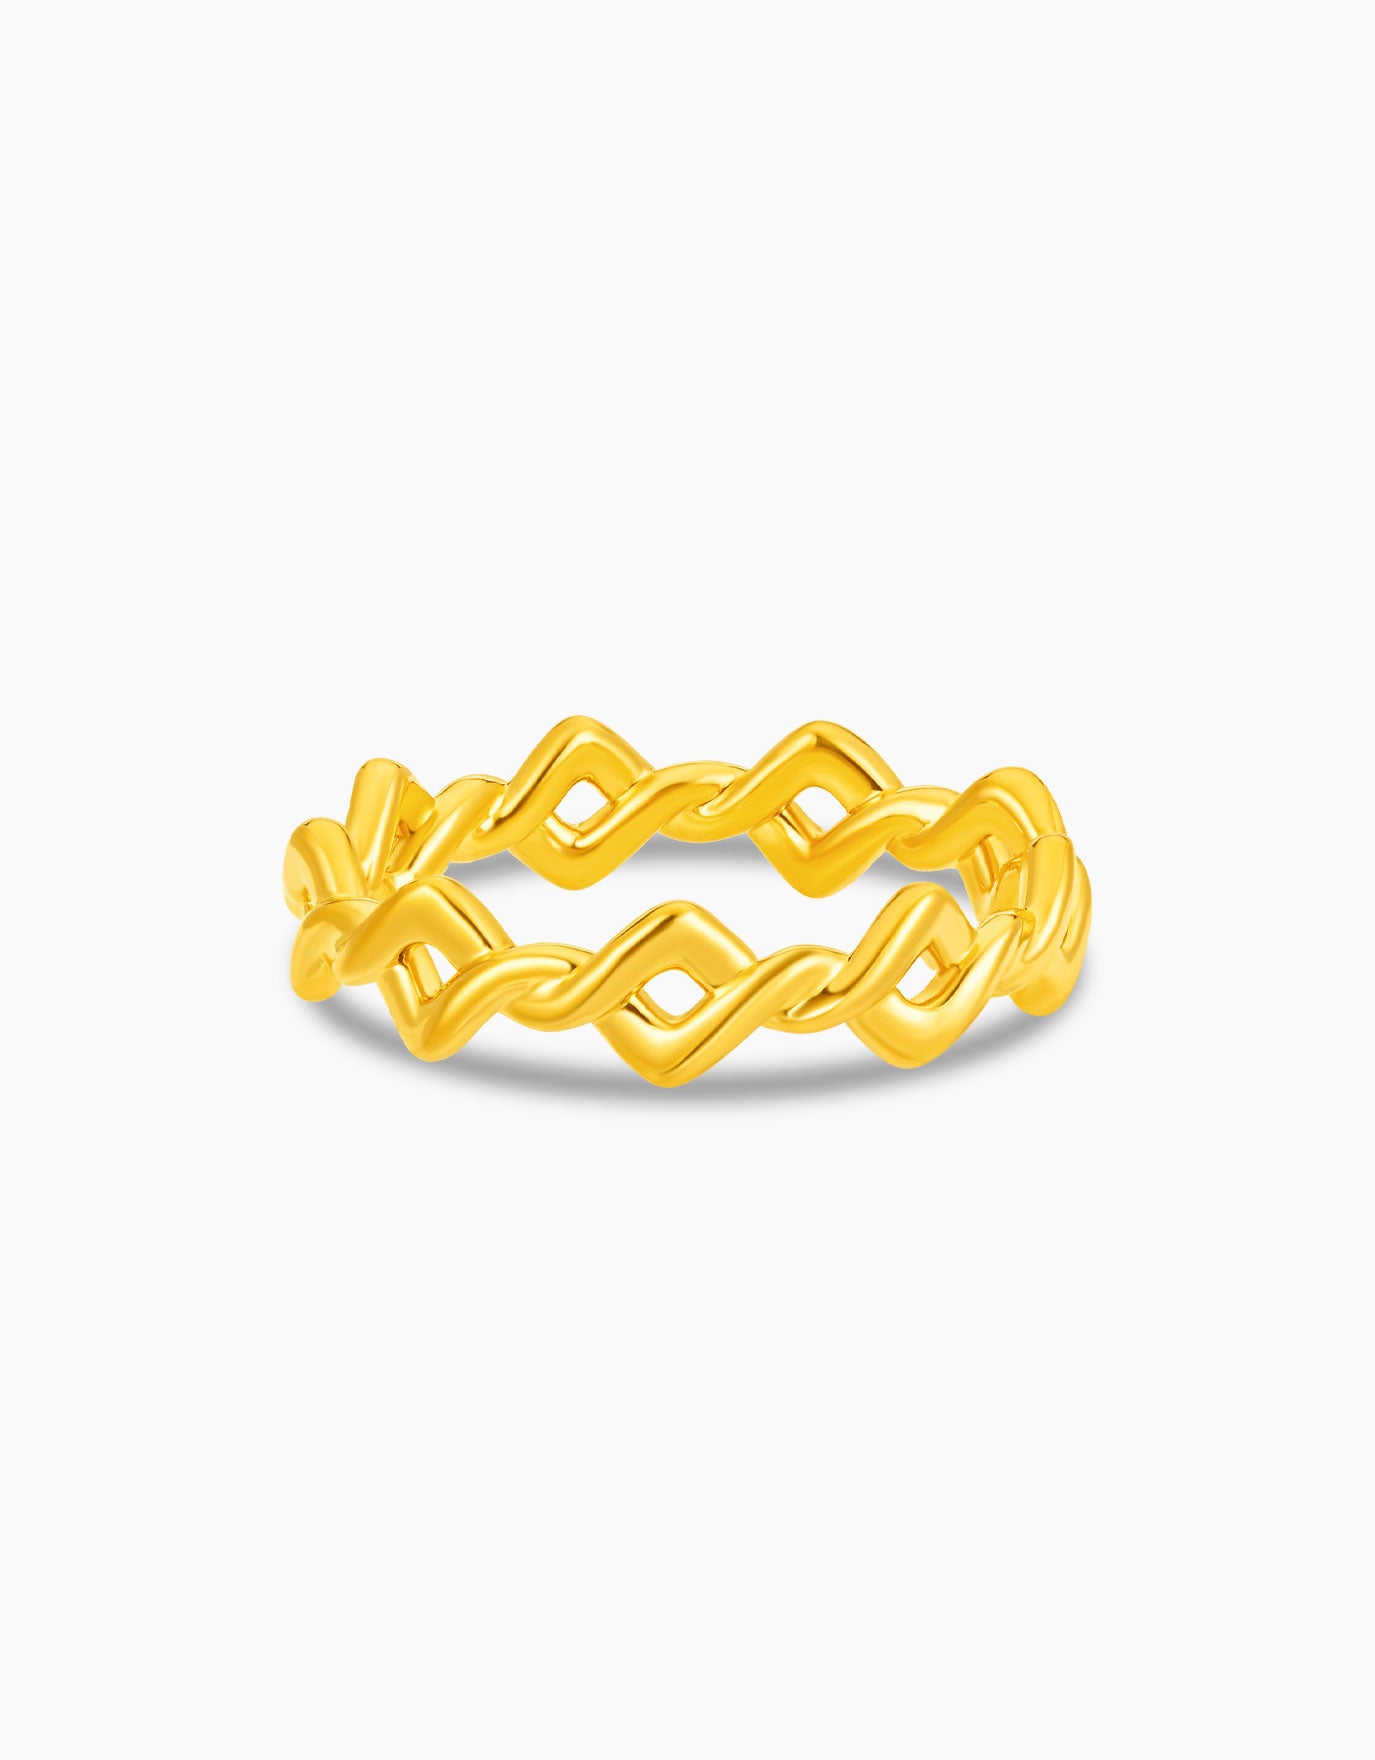 LVC Delicate Twist 999 Gold Ring